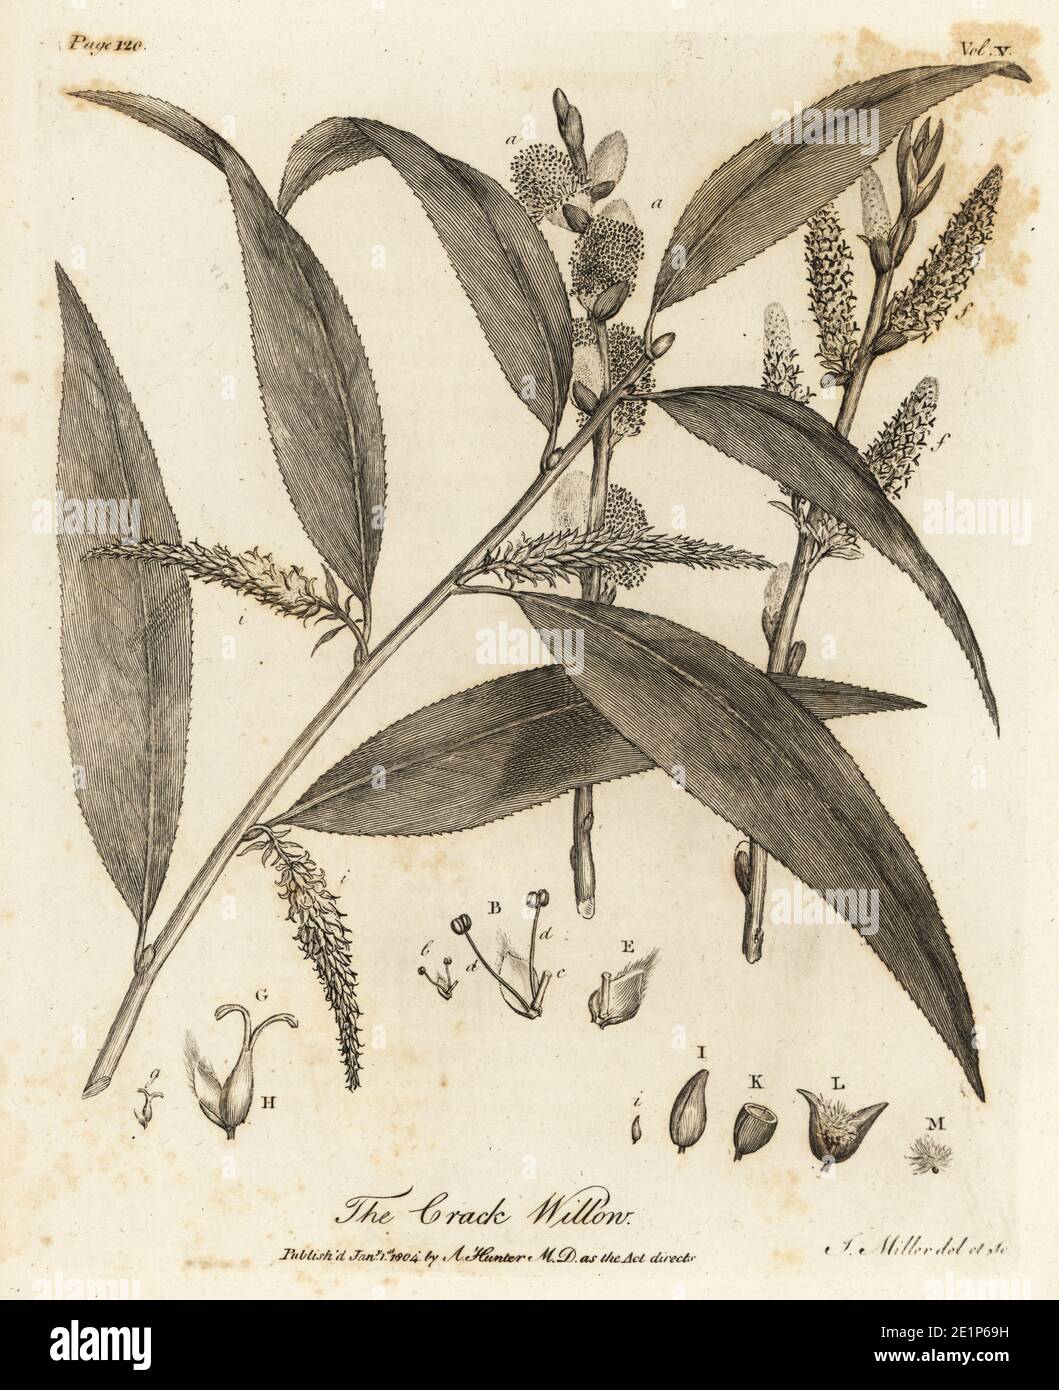 Crack willow or brittle willow, Salix fragilis. Copperplate engraving drawn and engraved by John Miller (Johann Sebastian Muller) from John Evelyn’s Sylva, or A Discourse of Forest Trees and the Propagation of Timer, J. Dodsley, London, 1776. Stock Photo